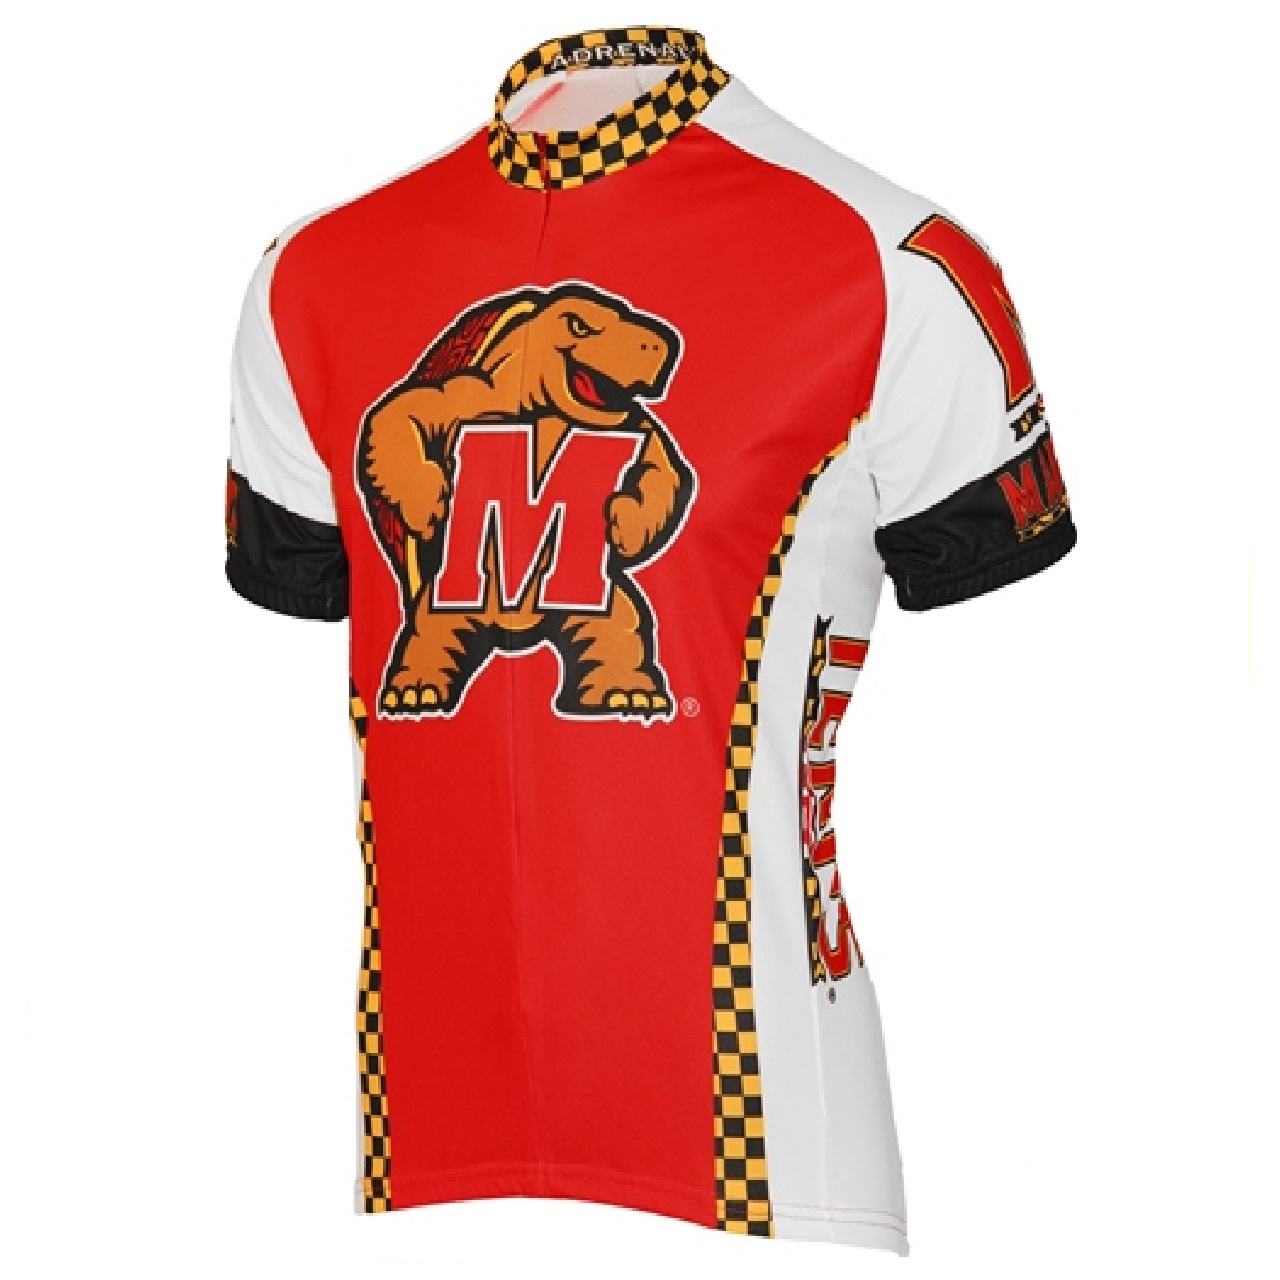 Adrenaline Promo University of Maryland Terps College  Road Cycling Jersey